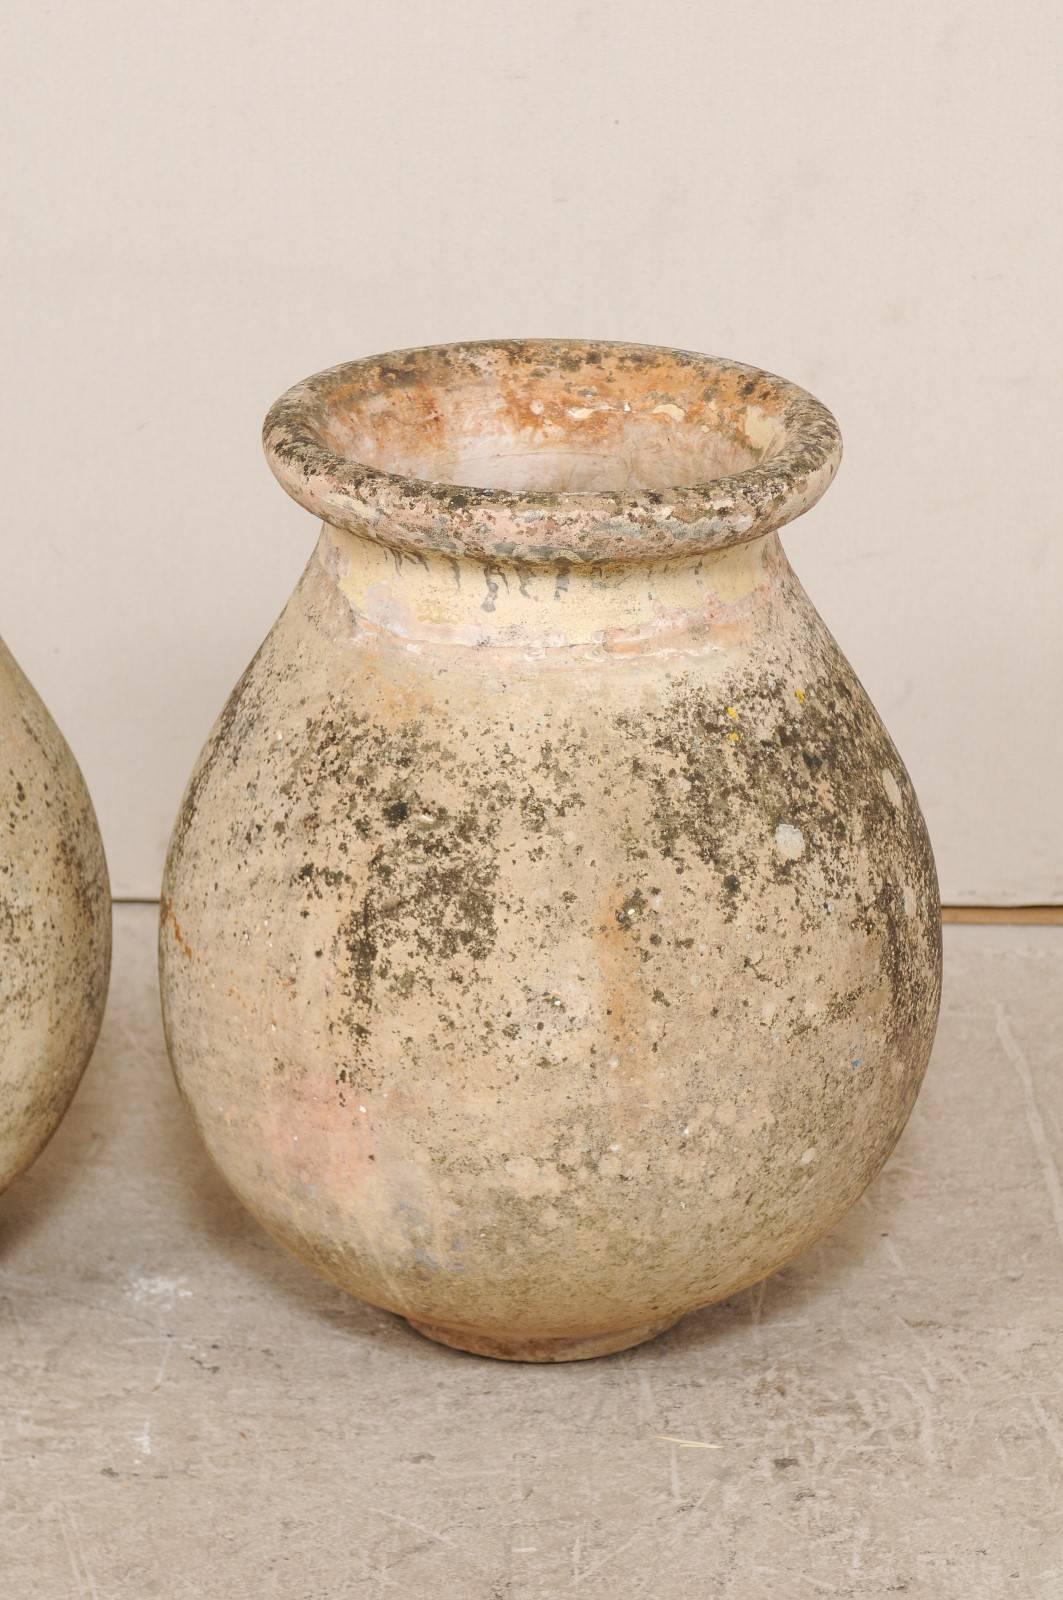 Hand-Crafted Pair of 19th Century Jars from the Village of Biot, France with Glaze Remains